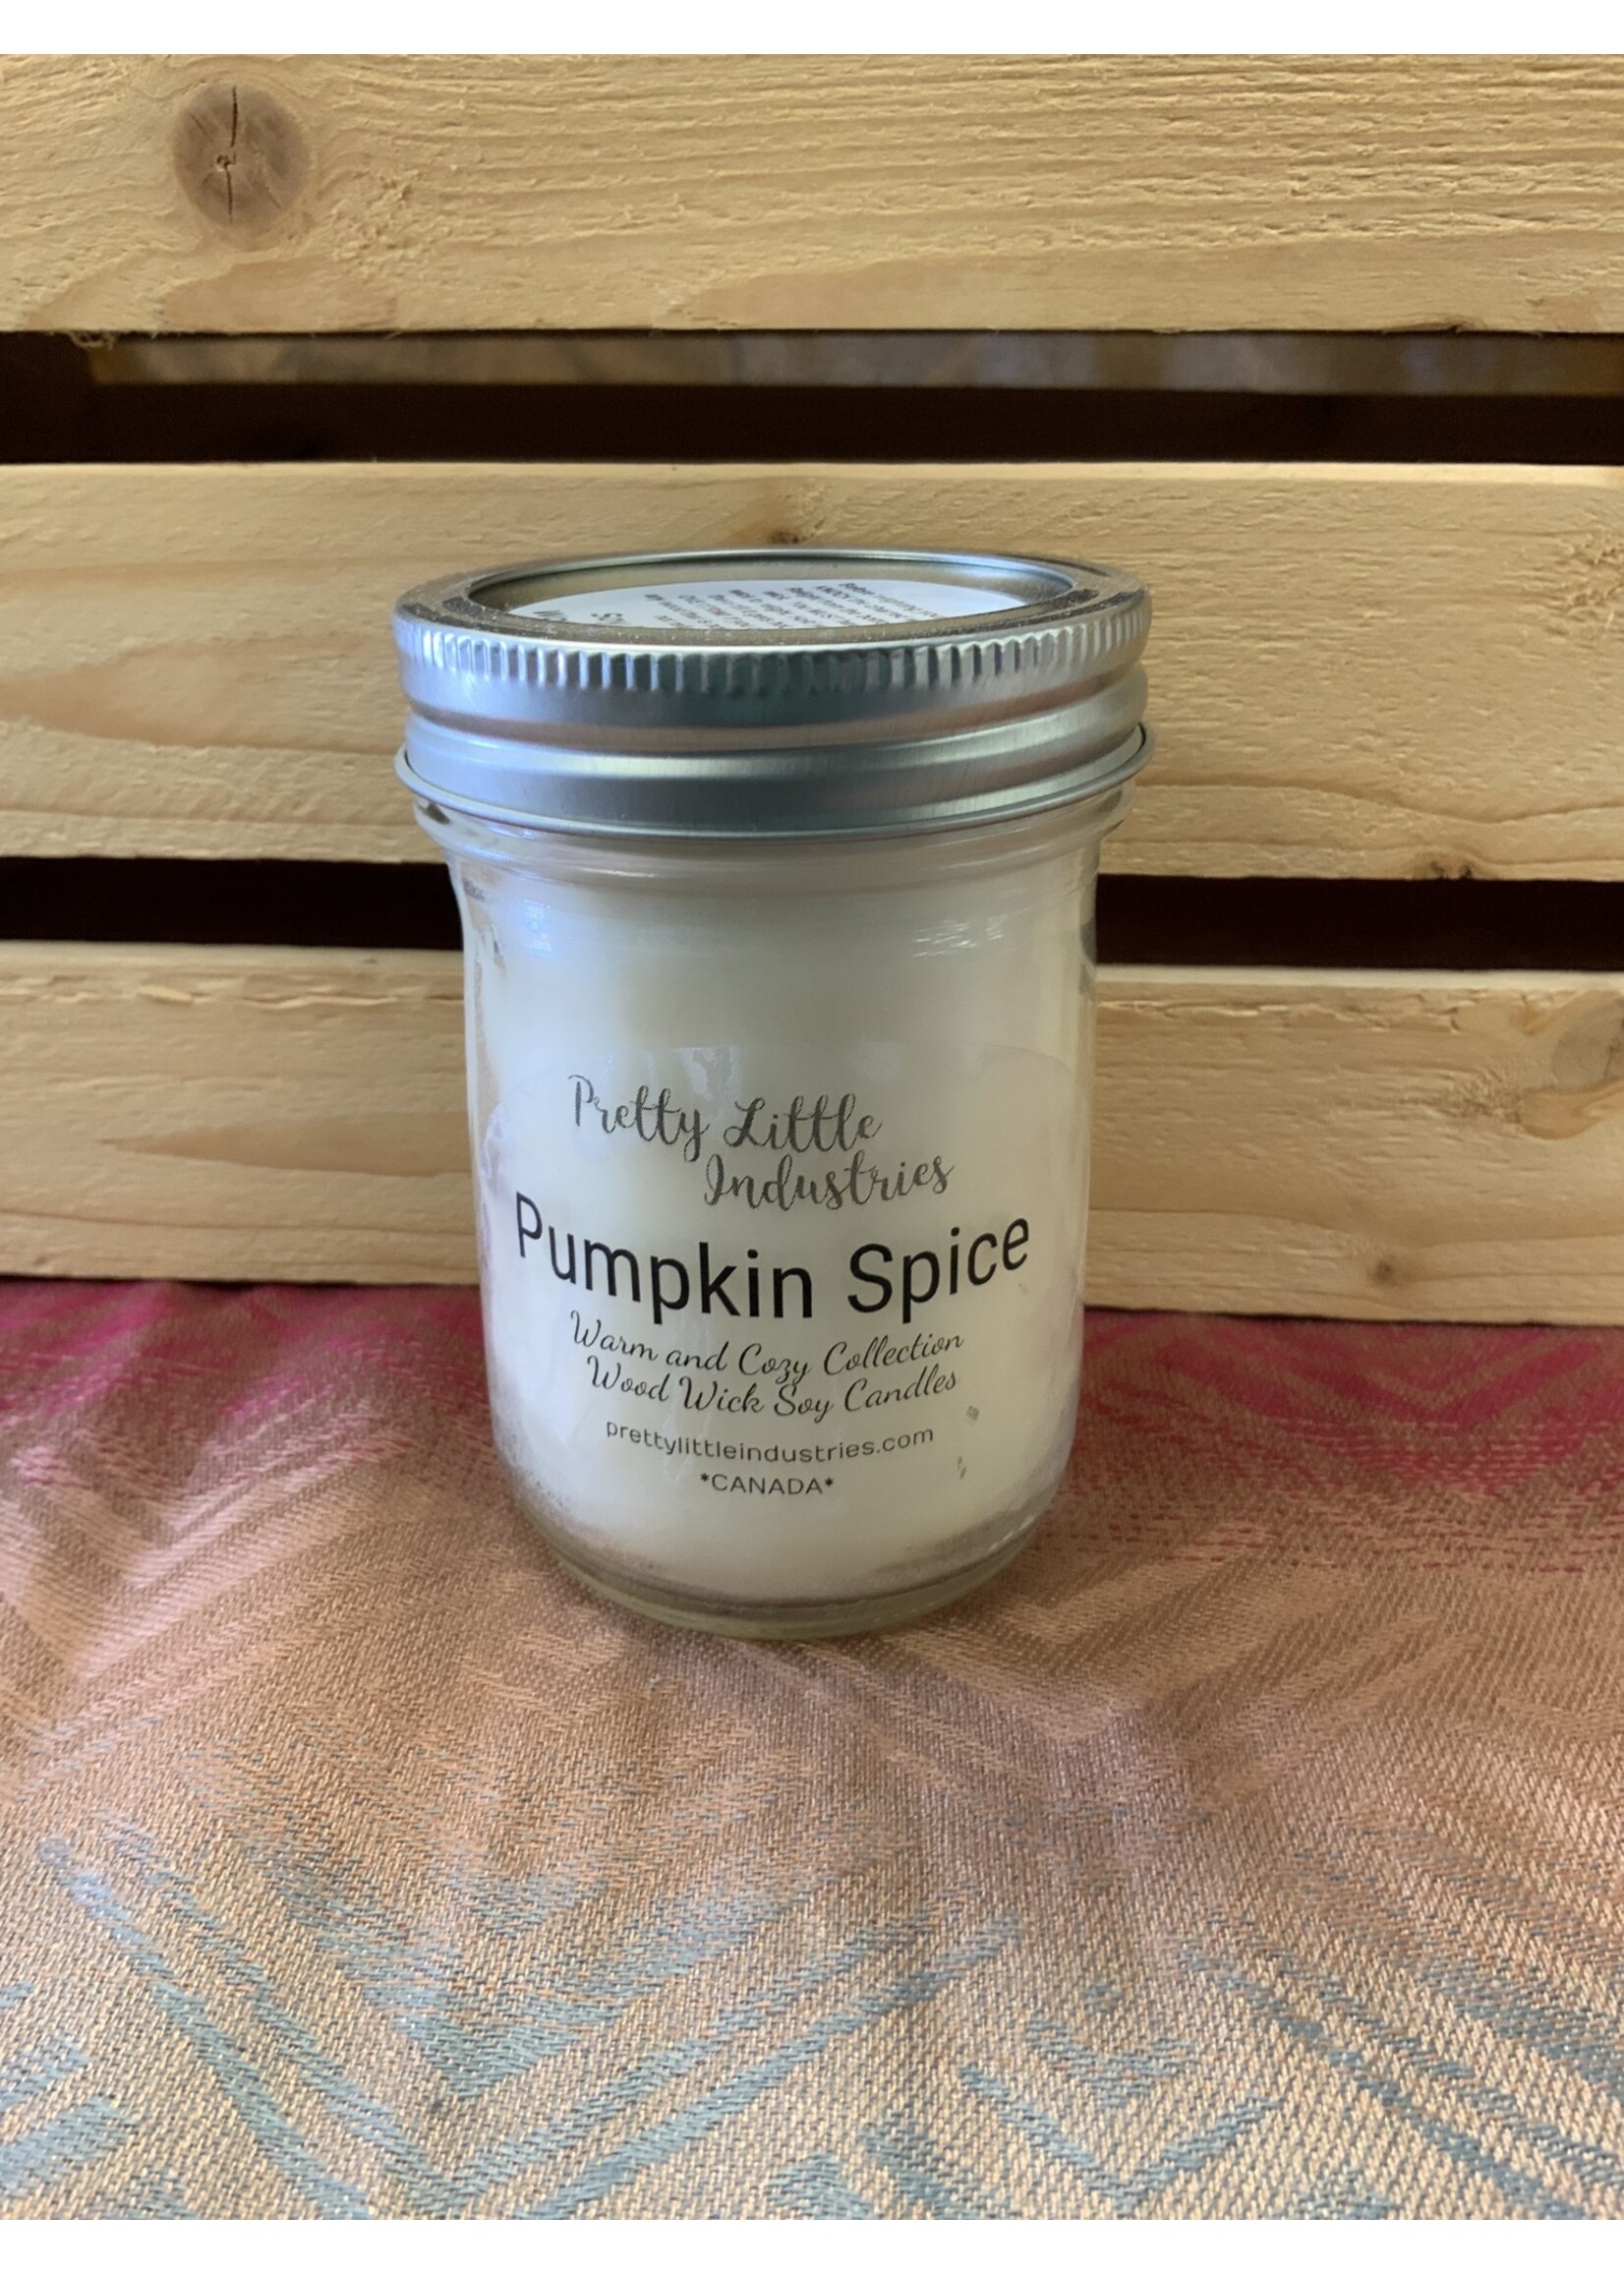 Soy PRETTY PUMPKIN SPICE WOOD WICK CANDLE